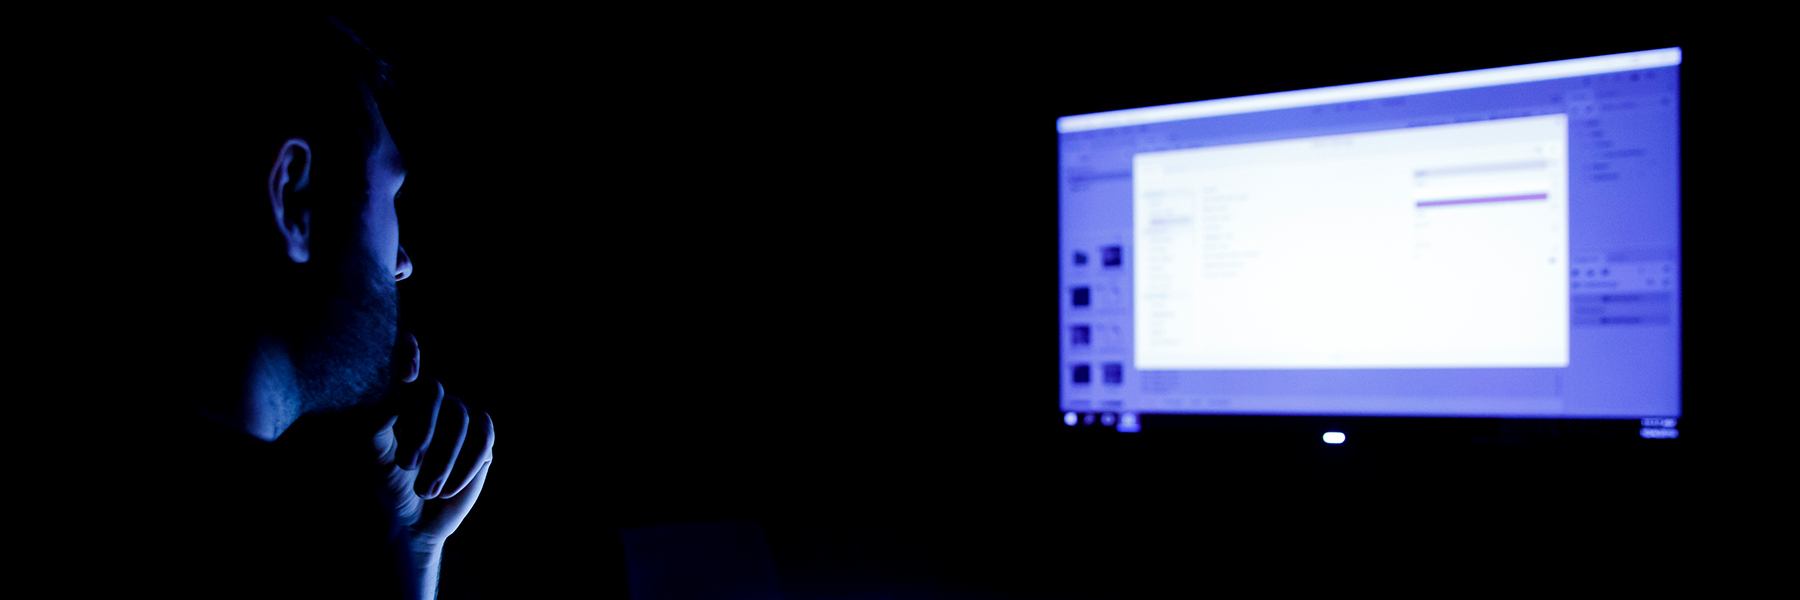 A student looks at a monitor in a dark room while he works on a digital project.